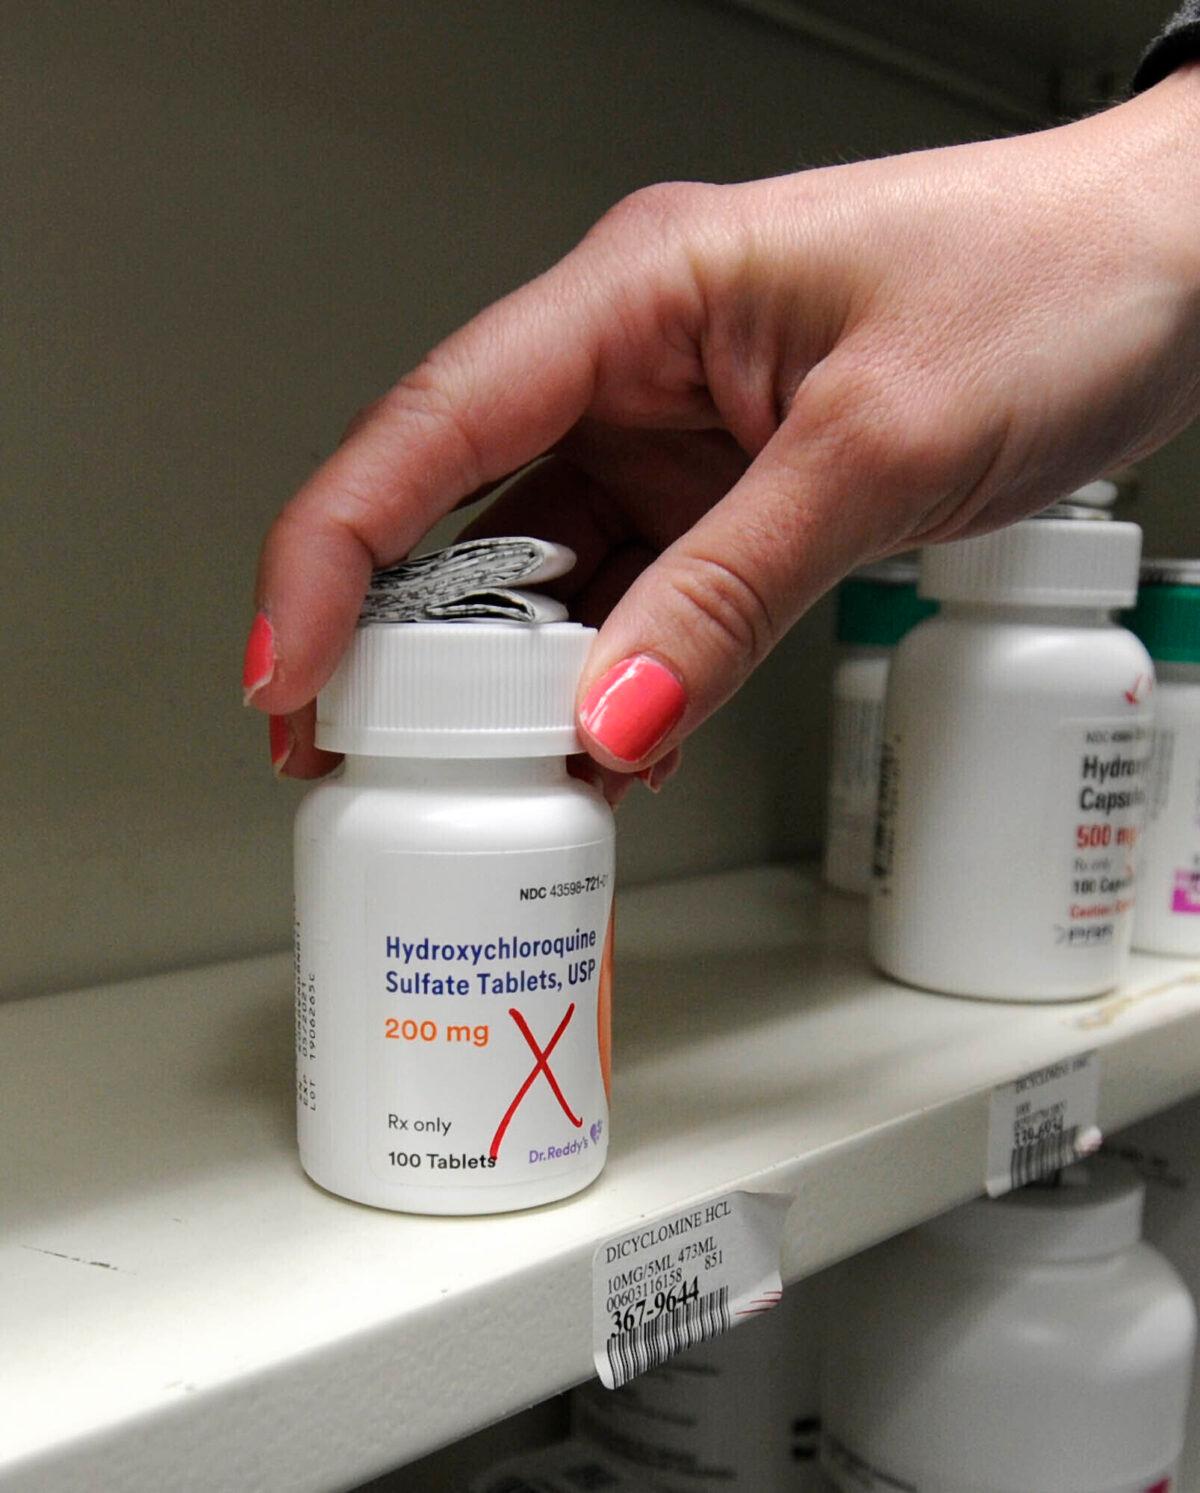 A bottle of Hydroxychloroquine at the Medicine Shoppe in Wilkes-Barre, Pa on March 31, 2020. Some politicians and doctors were sparring over whether to use hydroxychloroquine against the new coronavirus, with many scientists saying the evidence is too thin to recommend it yet. (Mark Moran/The Citizens' Voice via AP)